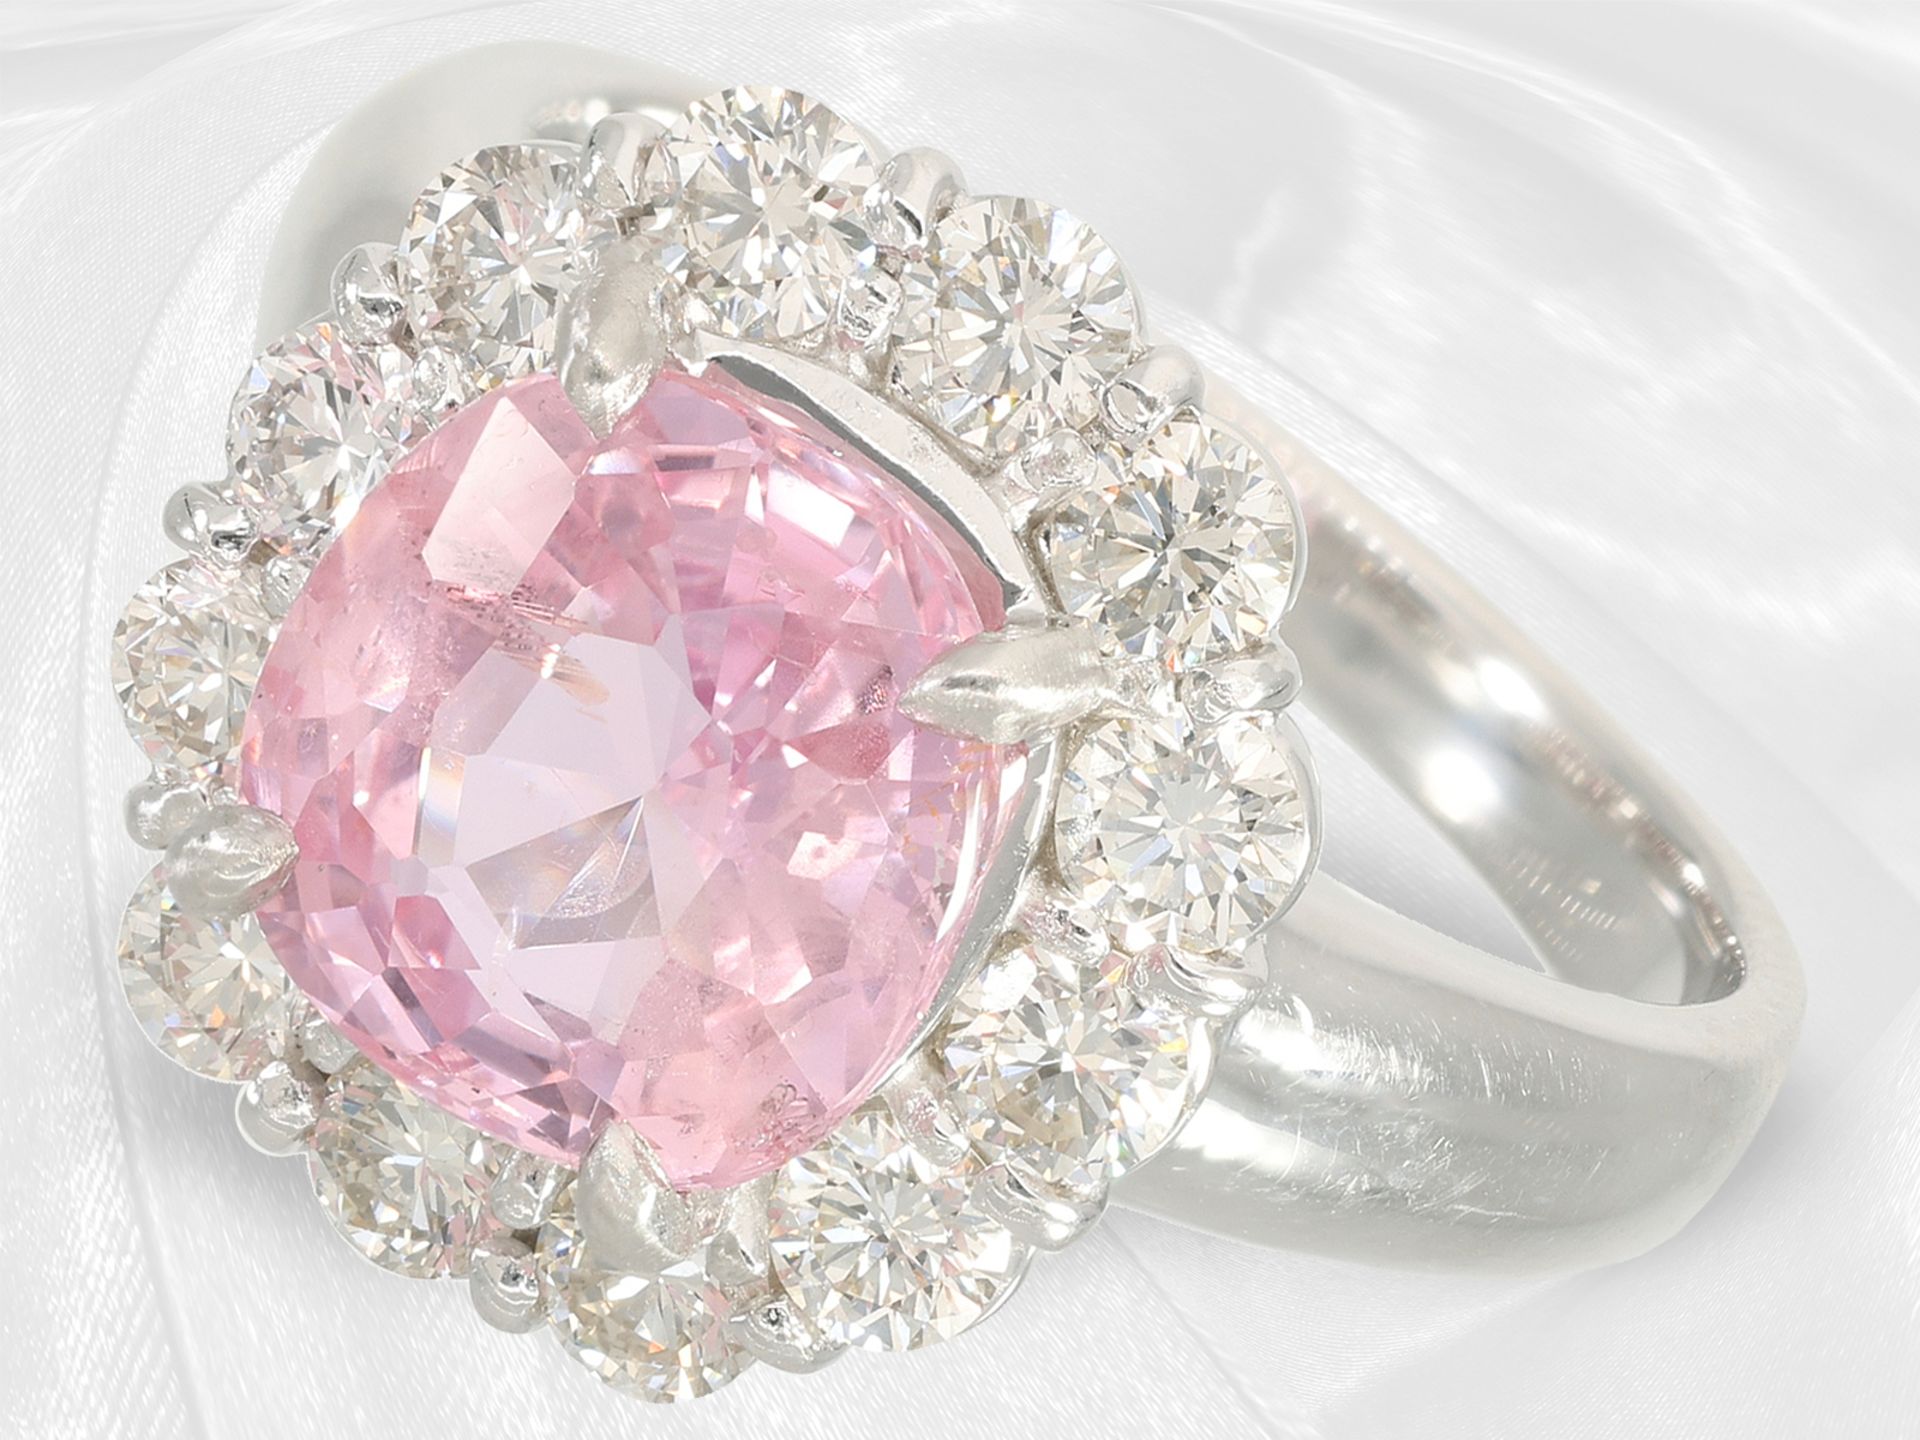 Ring: extremely high quality brilliant-cut diamond/sapphire ring with certified "NO HEAT Padparadsch